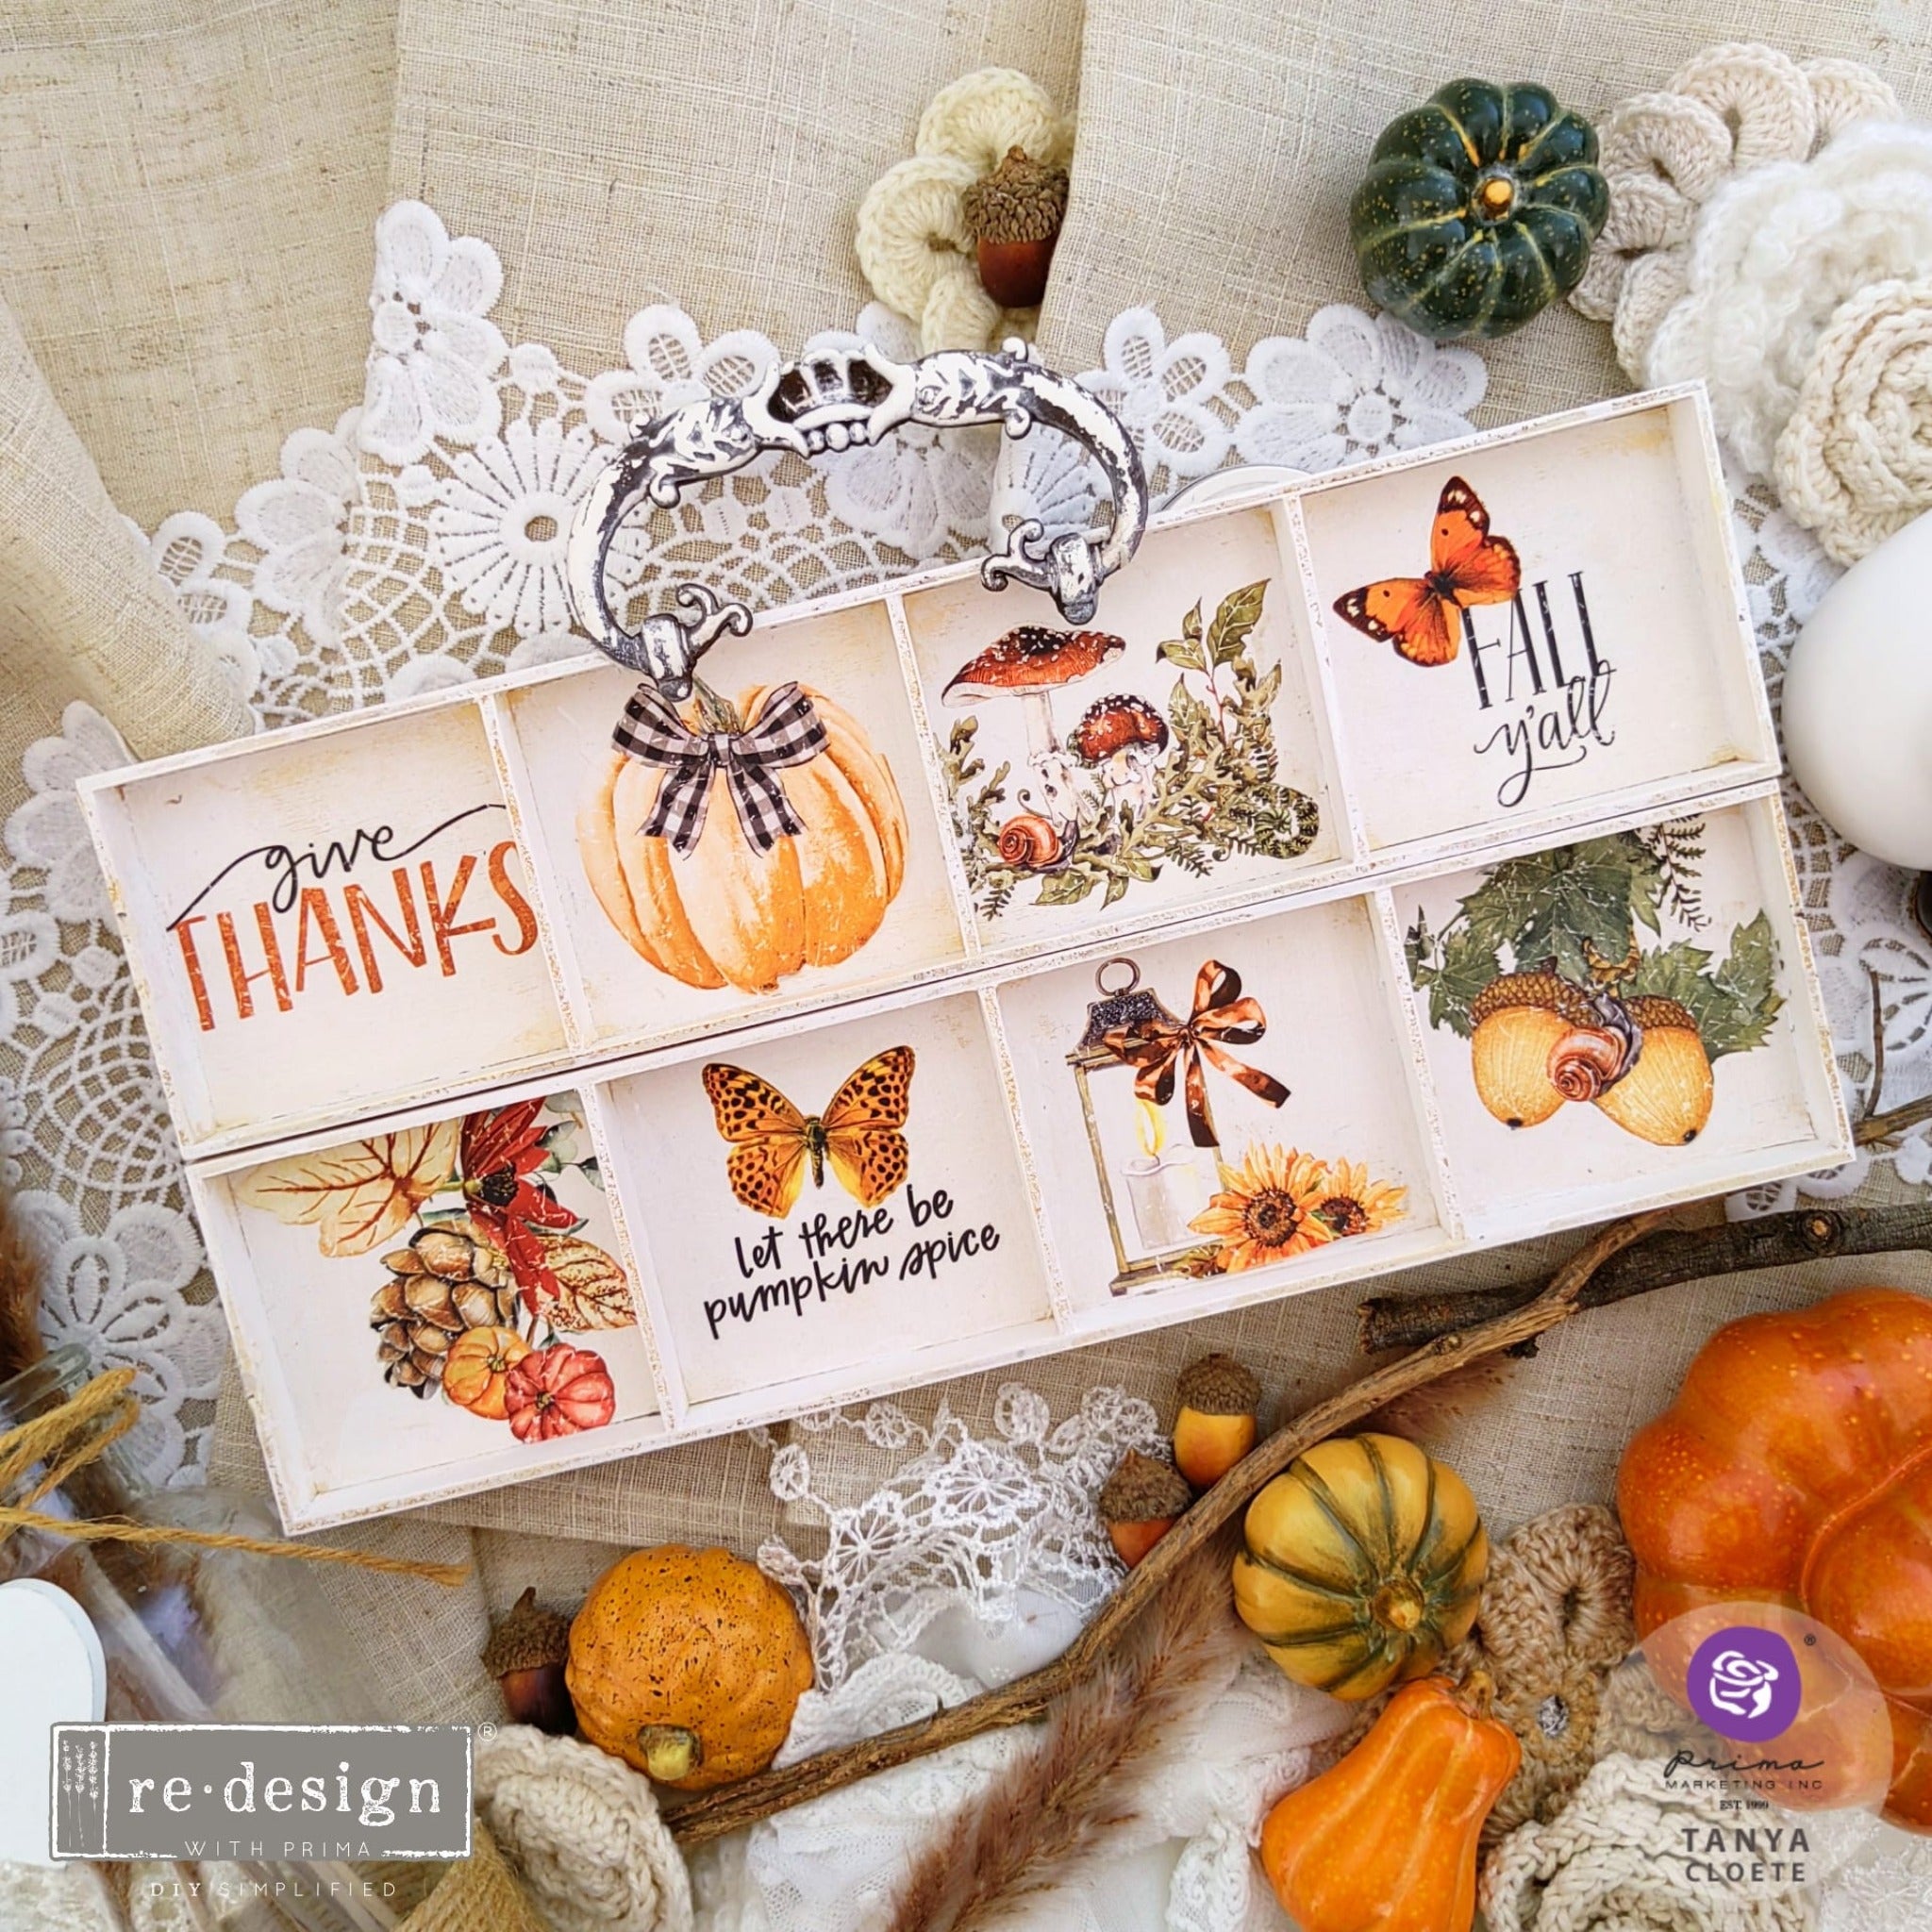 A printer's tray refurbished by Tanya Cloete is painted soft white and features ReDesign with Prima's Autumn Essentials small transfer inside all 8 cubby holes.